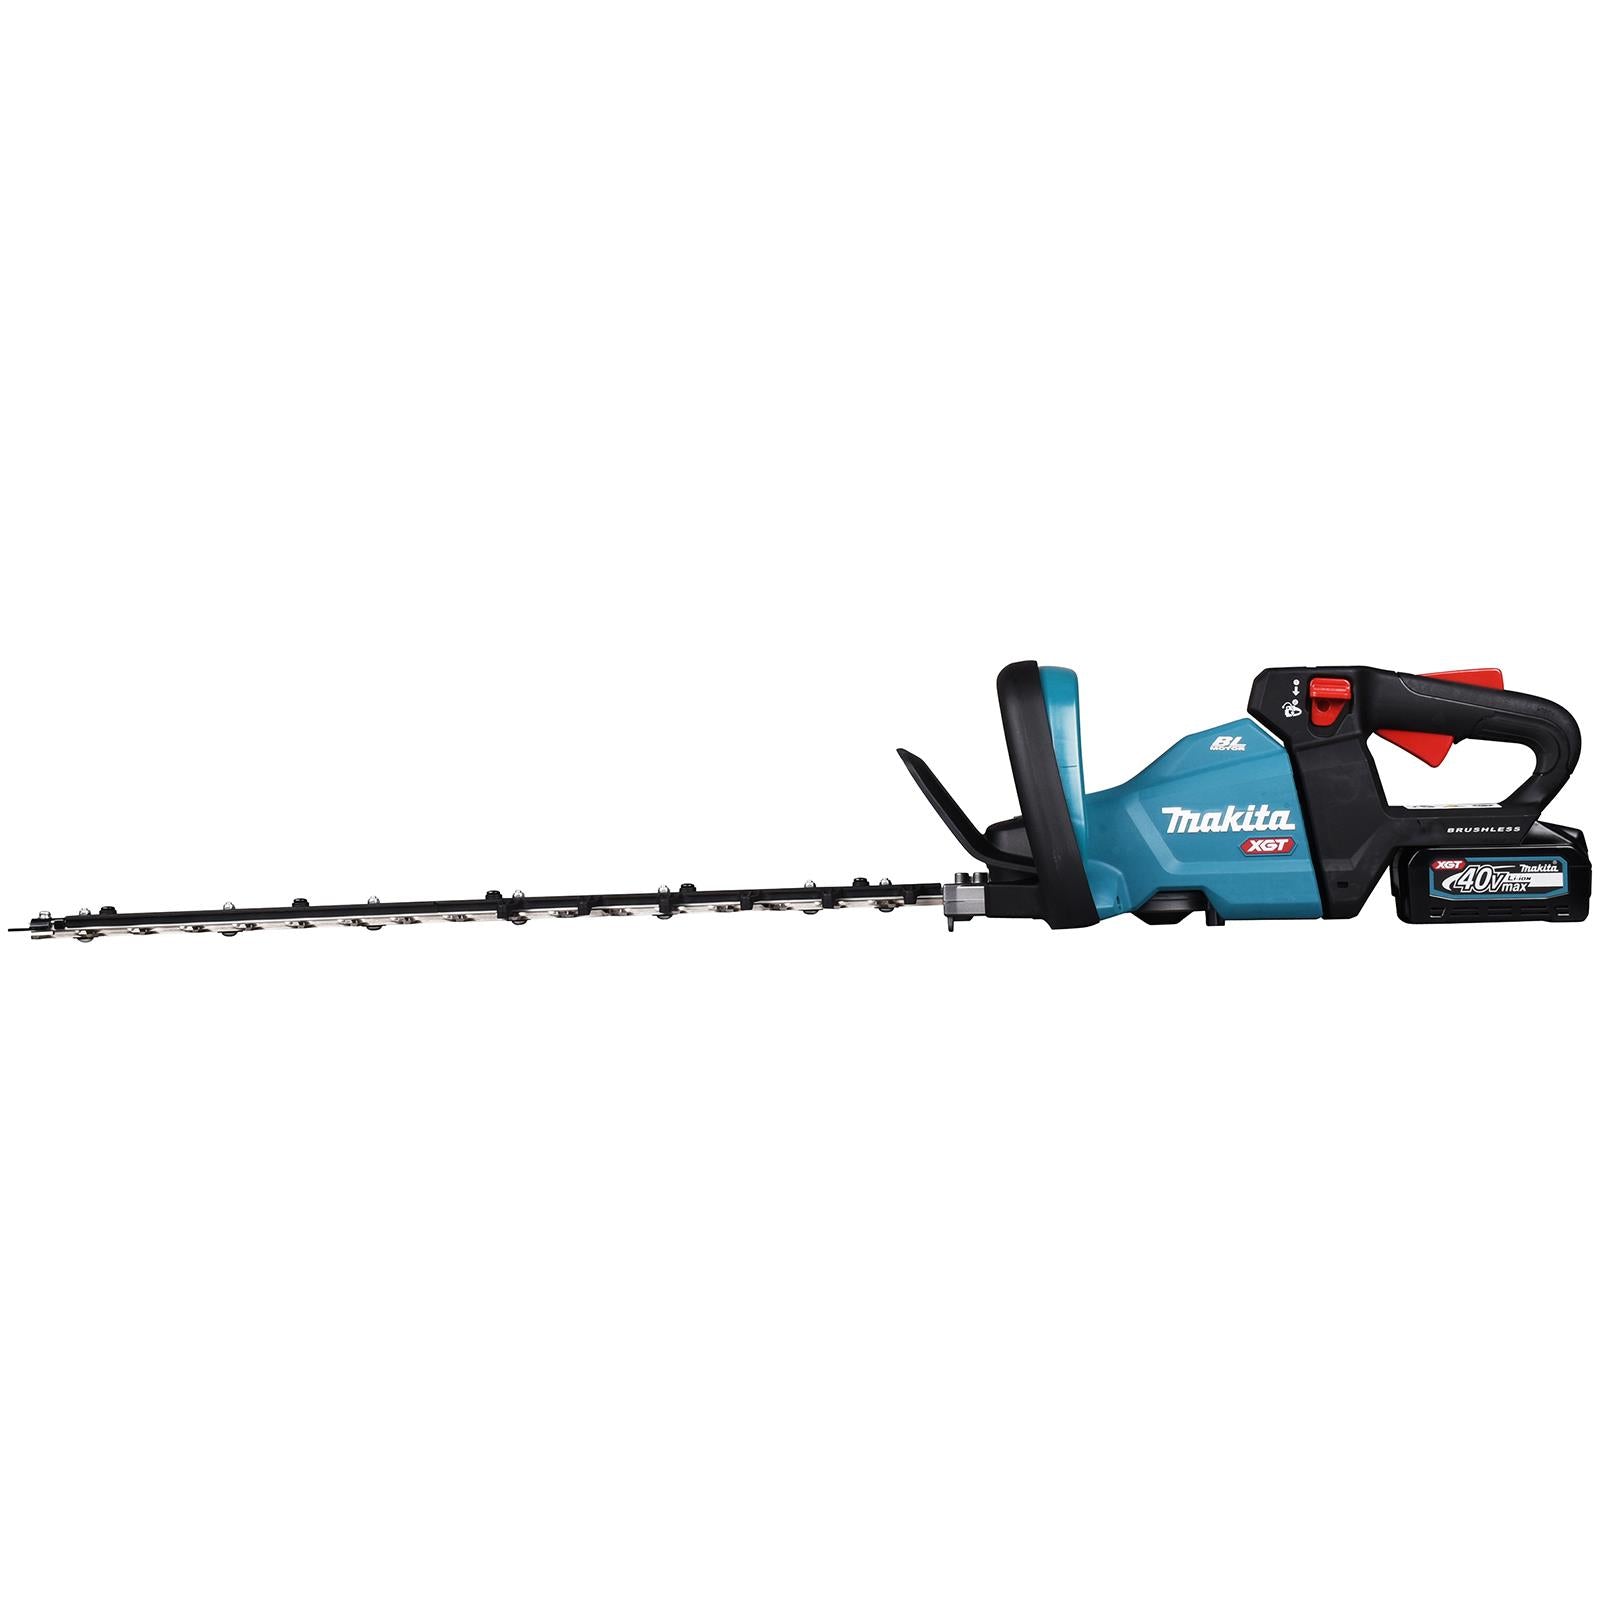 Makita Hedge Trimmer Kit 60cm 40V XGT Li-ion Brushless Cordless 2 x 2.5Ah Battery and Rapid Charger Garden Bush Cutter Cutting UH006GD201